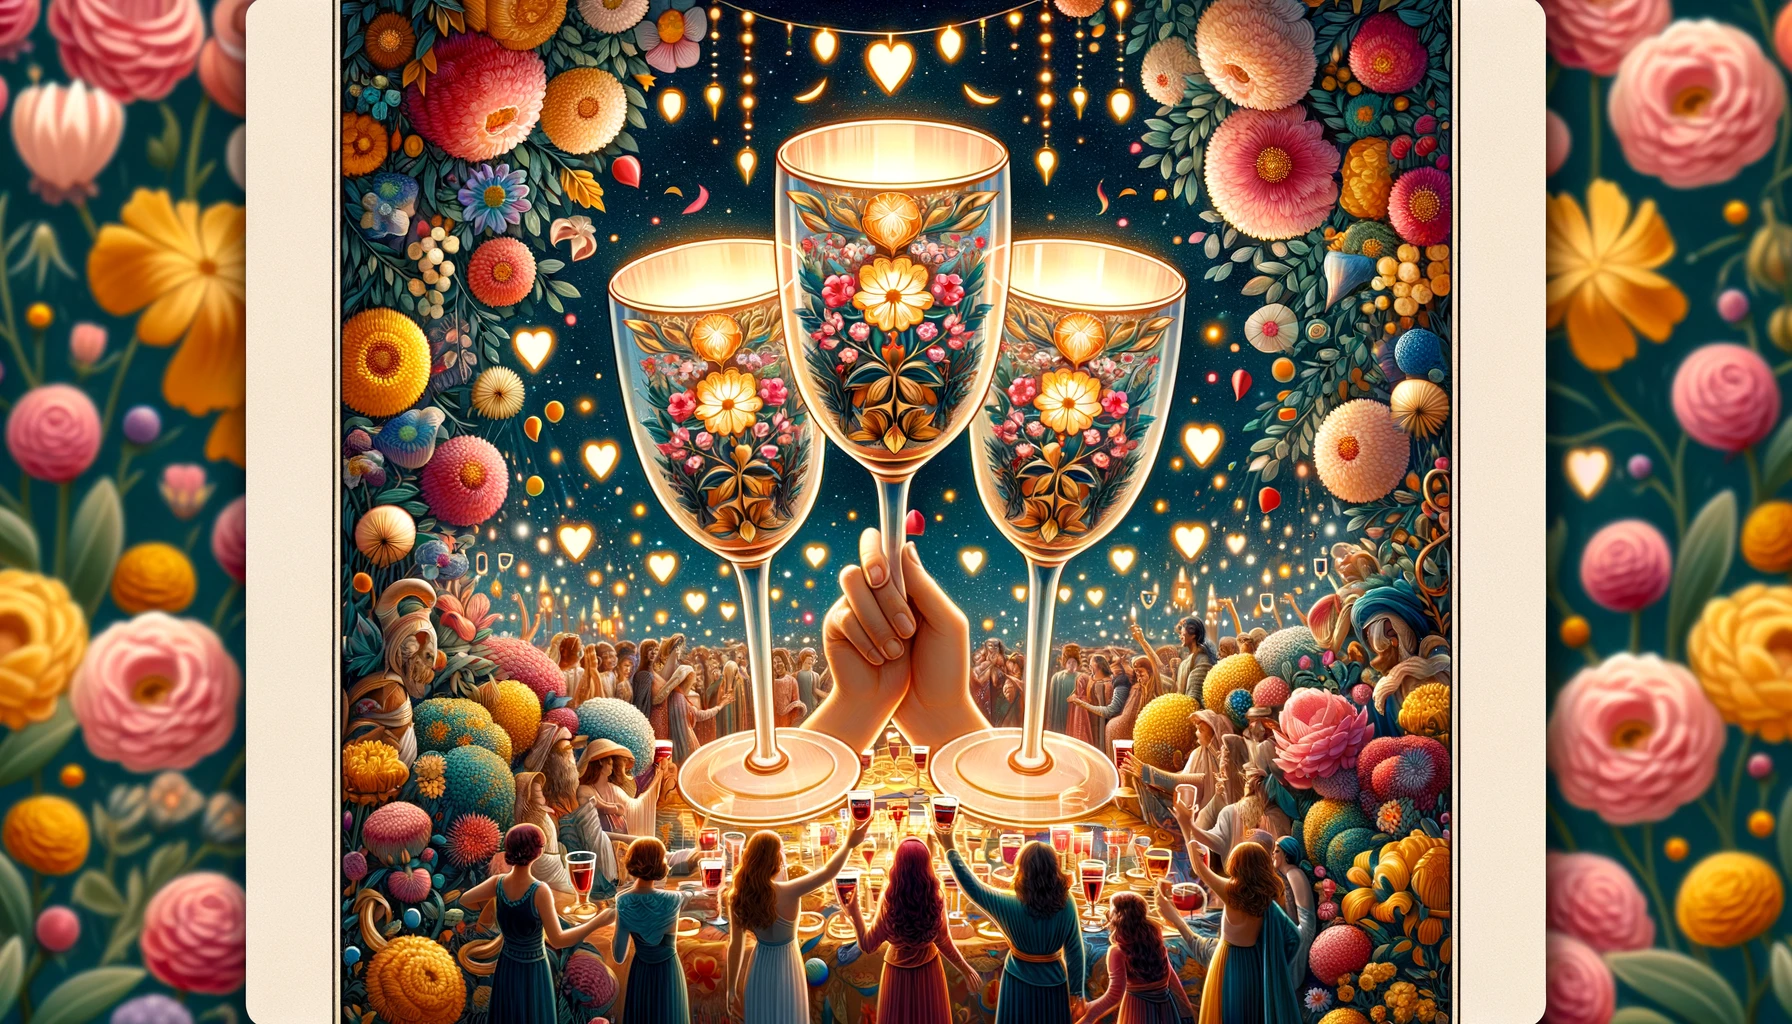 "Illustration portraying three cups surrounded by festive elements, evoking the joyous celebration of love, friendship, and unity. The vibrant setting symbolizes the abundance of joy, support, and deep emotional connections celebrated through love and camaraderie, reflecting the successful outcome of love signified by the Three of Cups."